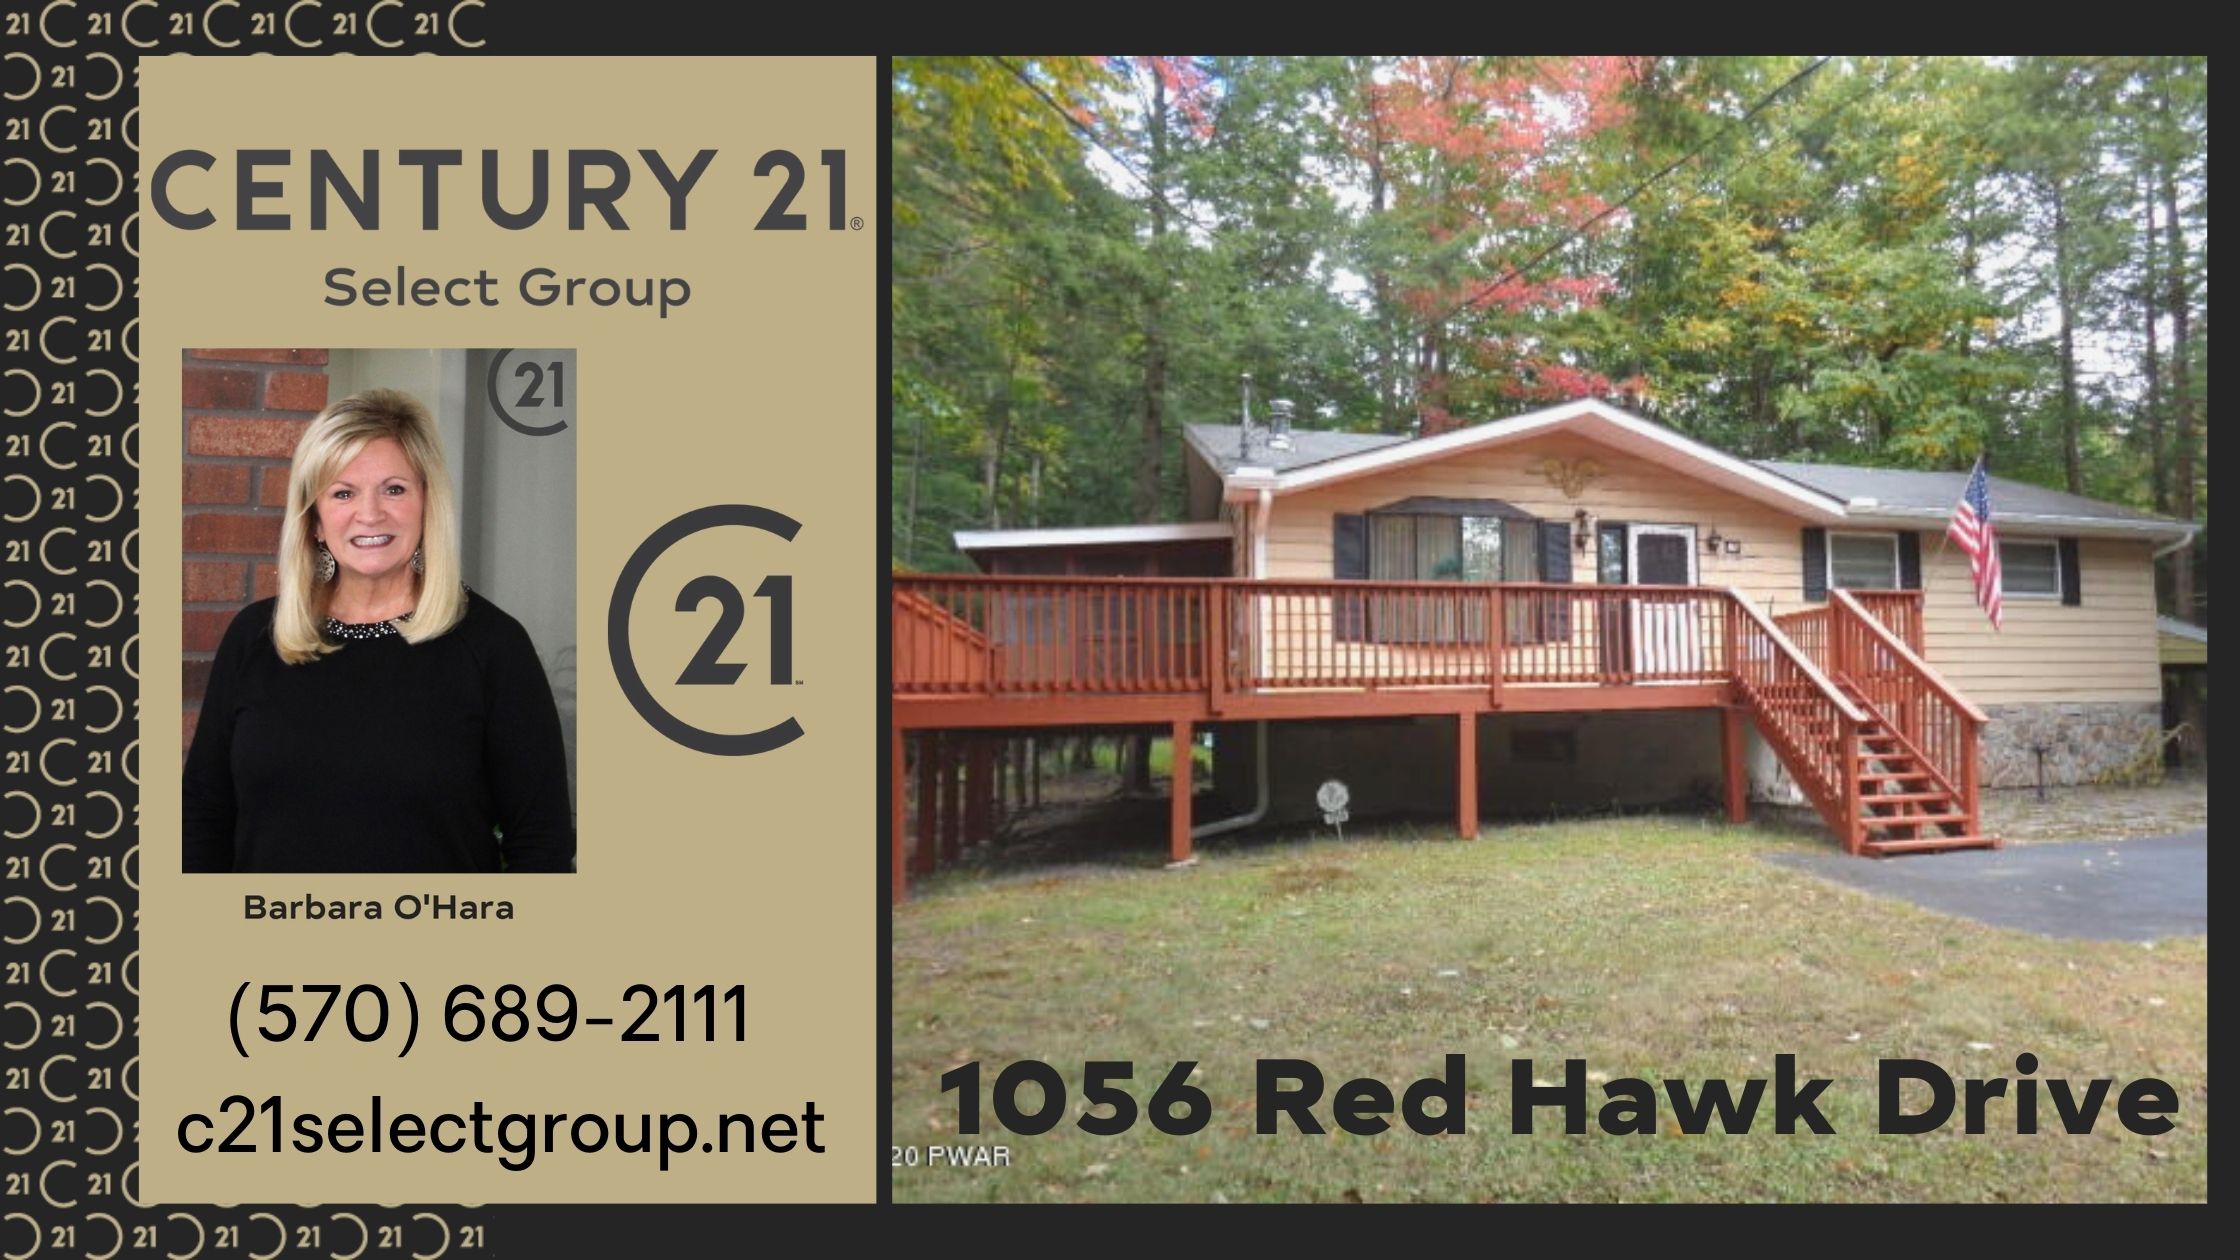 NEW PRICE! 1056 Red Hawk Drive: Lovely Ranch in Wallenpaupack Lake Estates